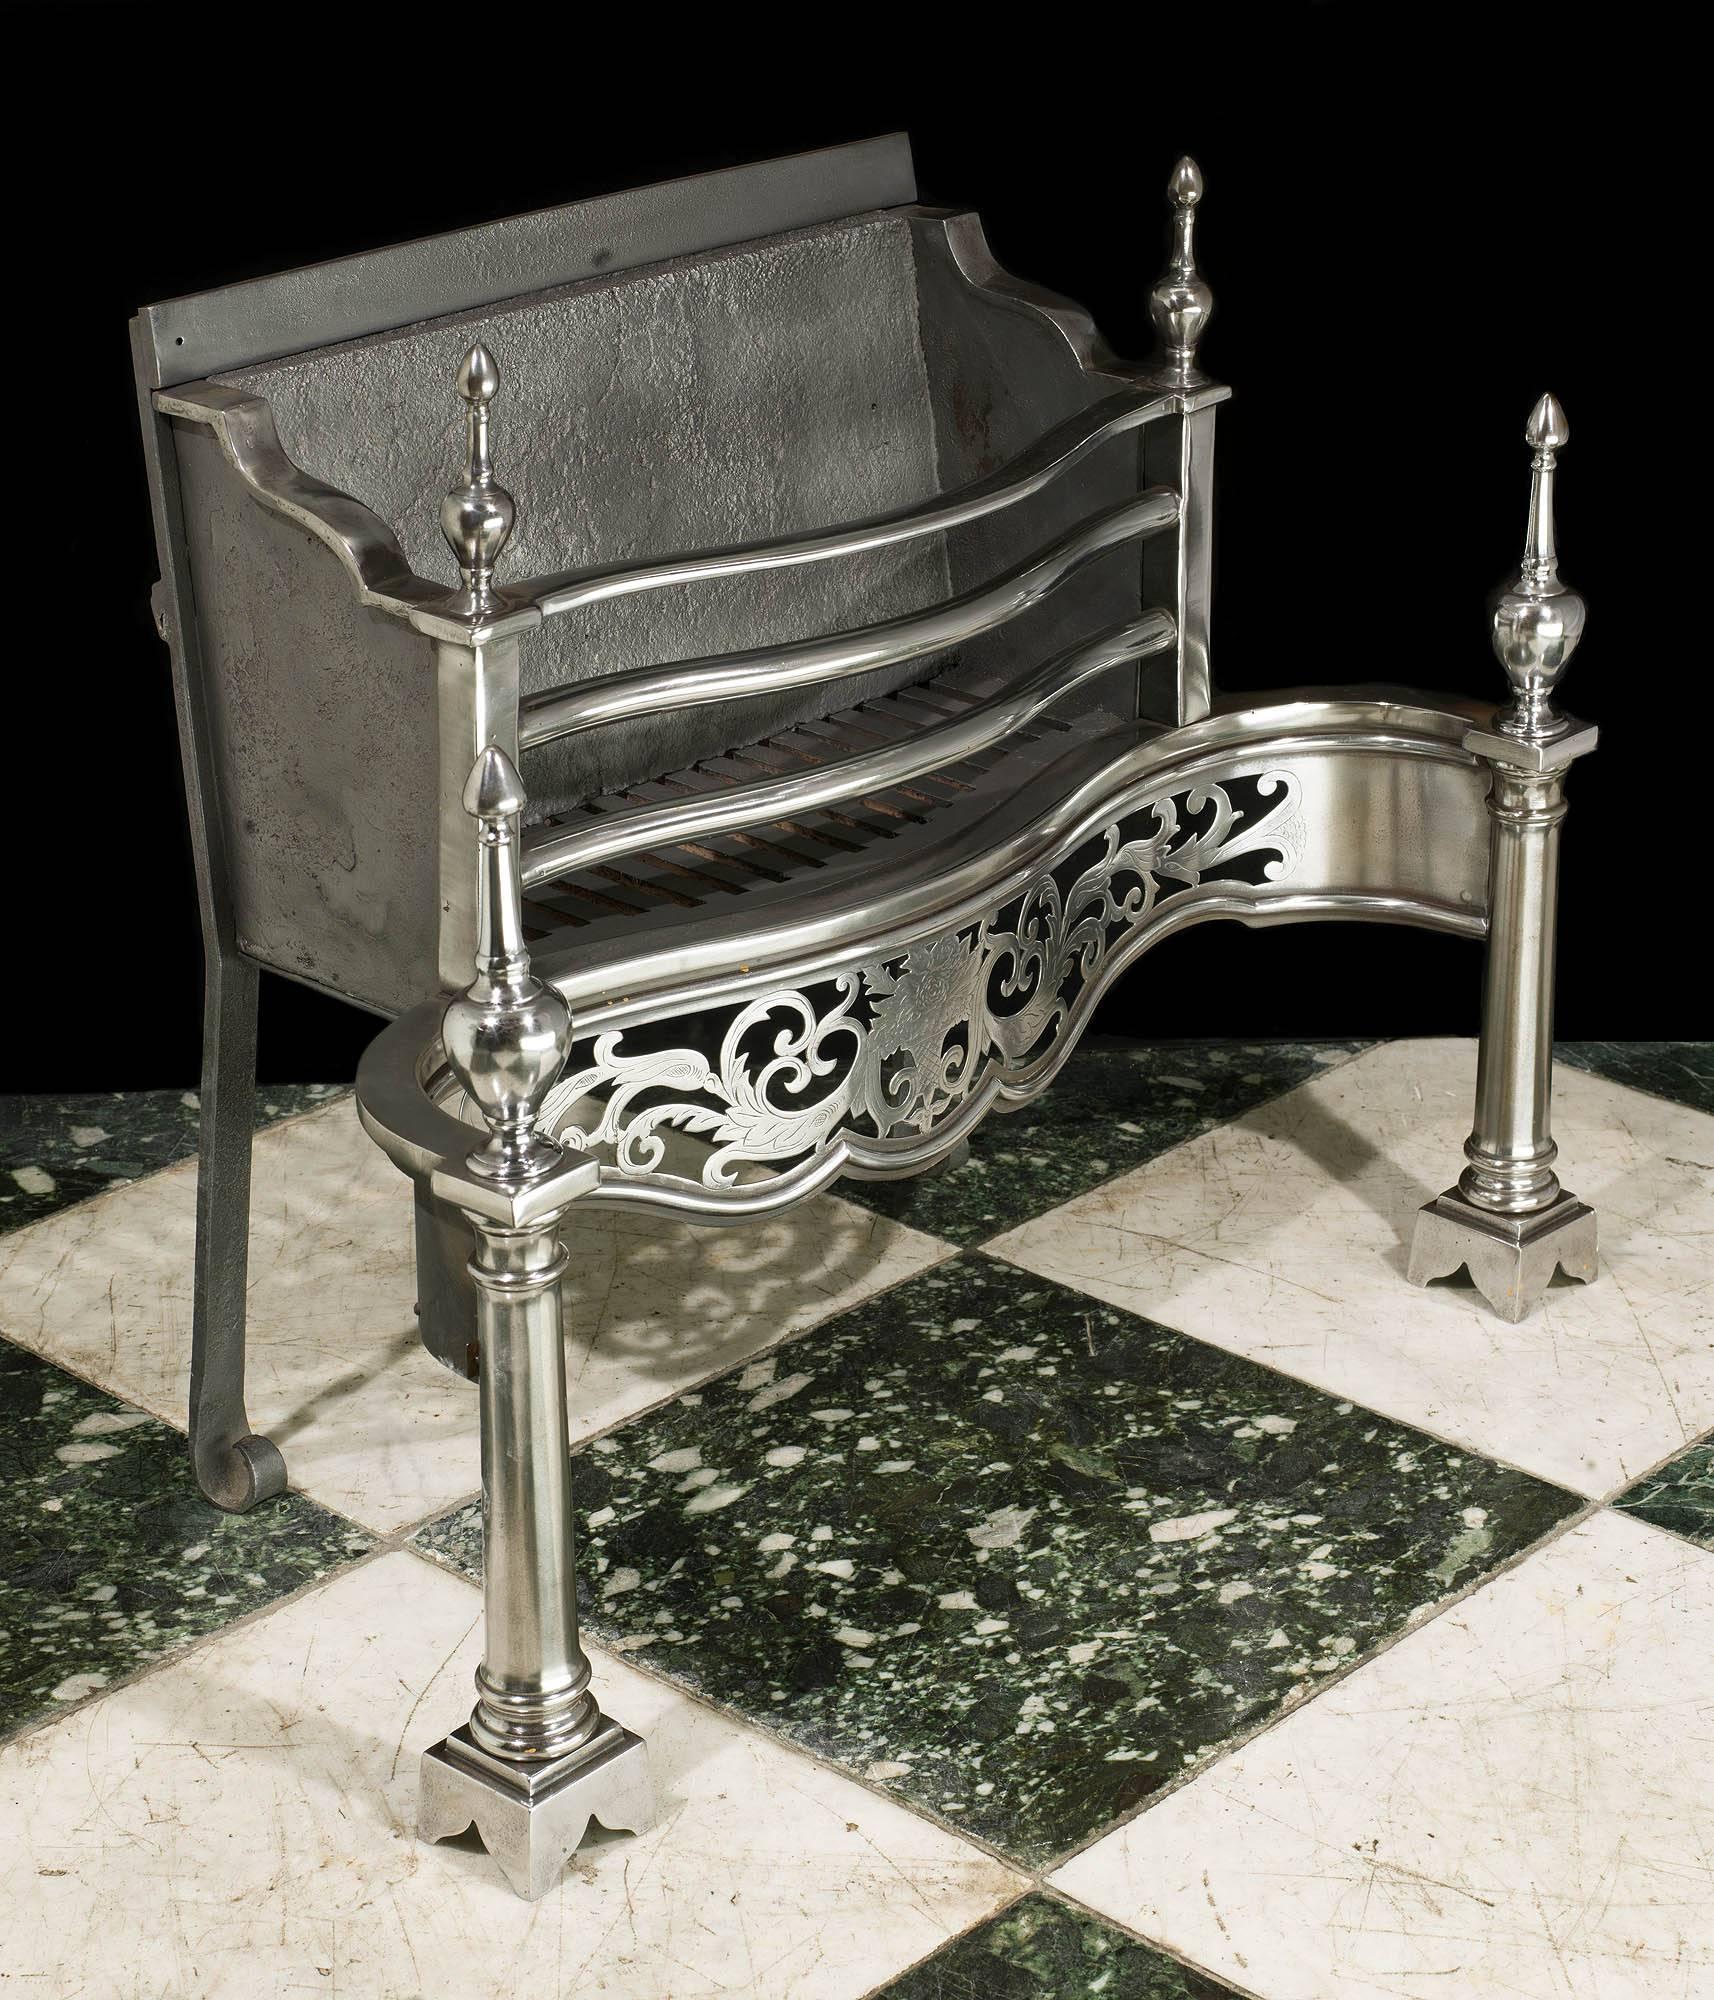 A George III style three barred polished steel fire basket surmounted by a pair of spire finials above a deep, engraved and pierced serpentine apron with a further taller pair of spire finials on the faceted columned standards.

English, late 19th